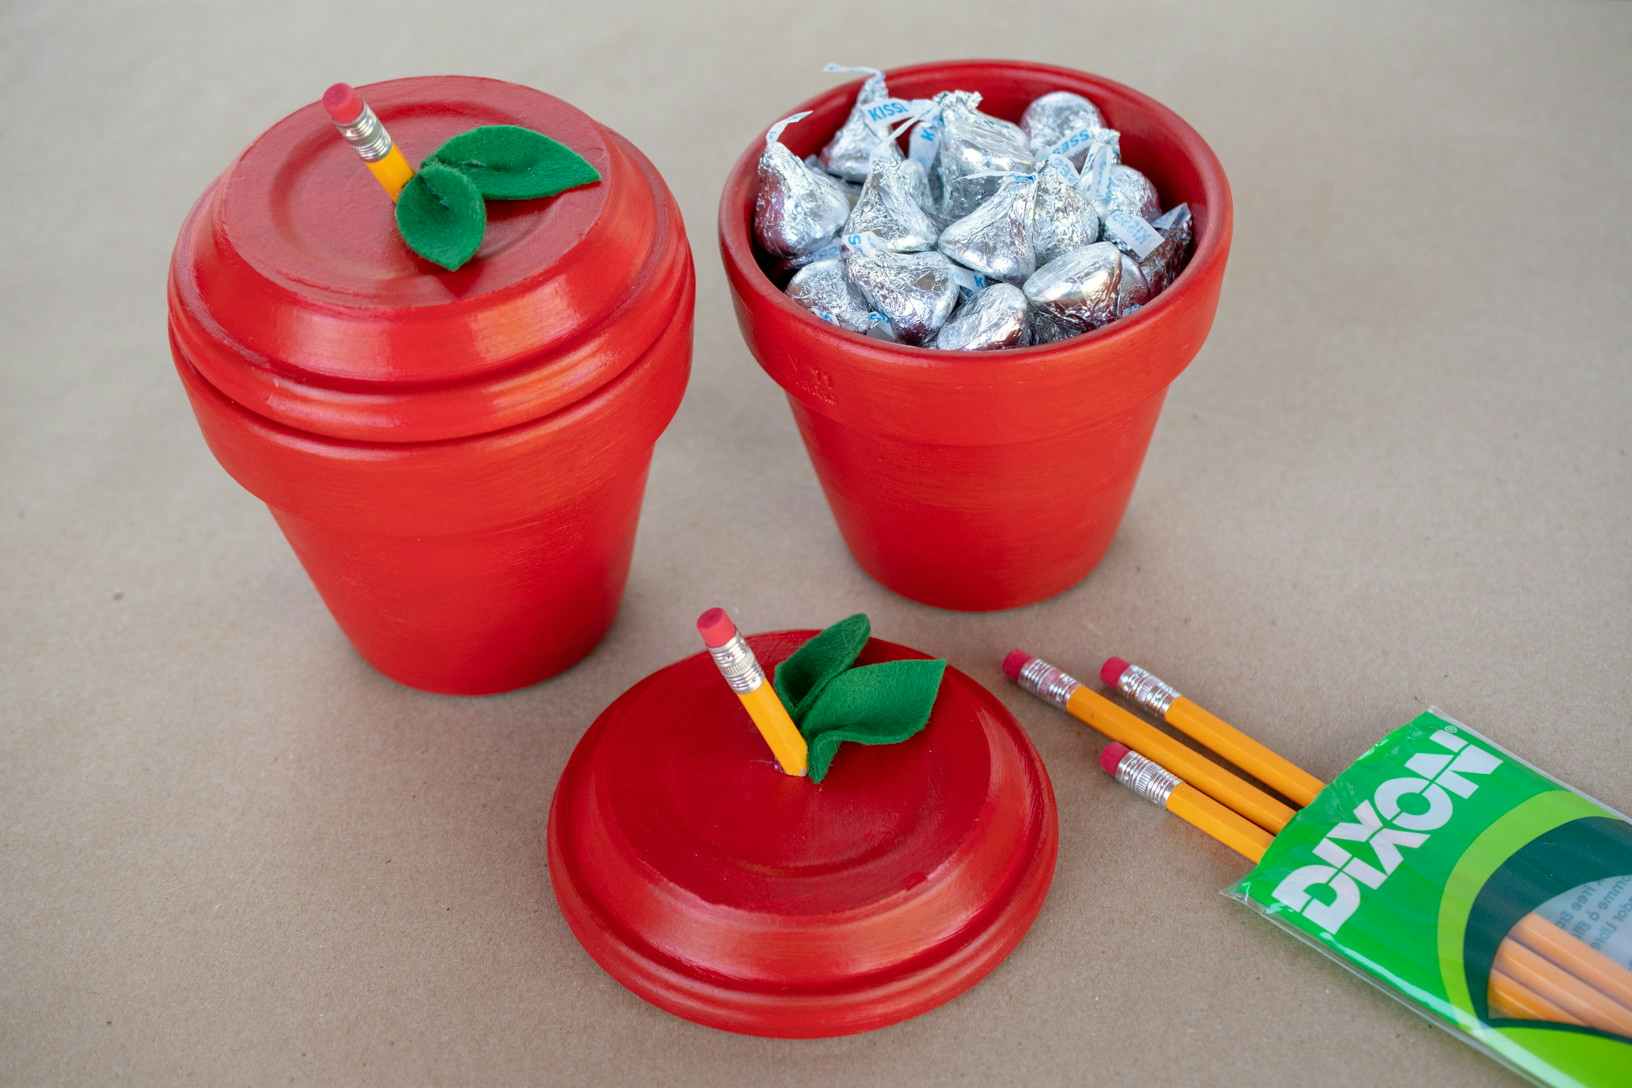 Mini terracotta pots crafted to look like red apples and filled with Hershey's kisses.